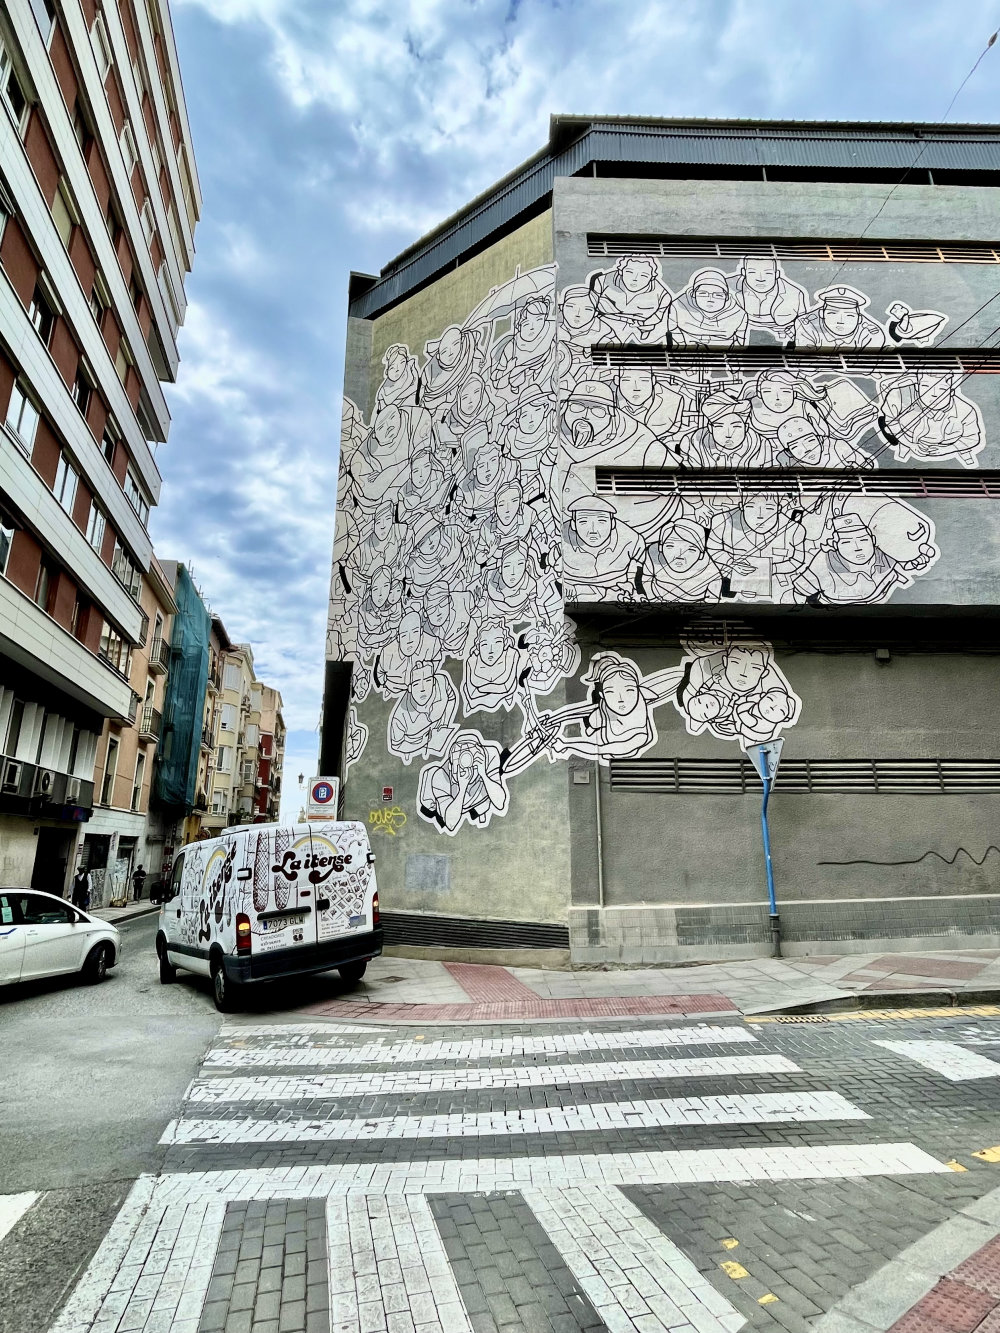 mural in Alicante (Alacant) by artist unknown.